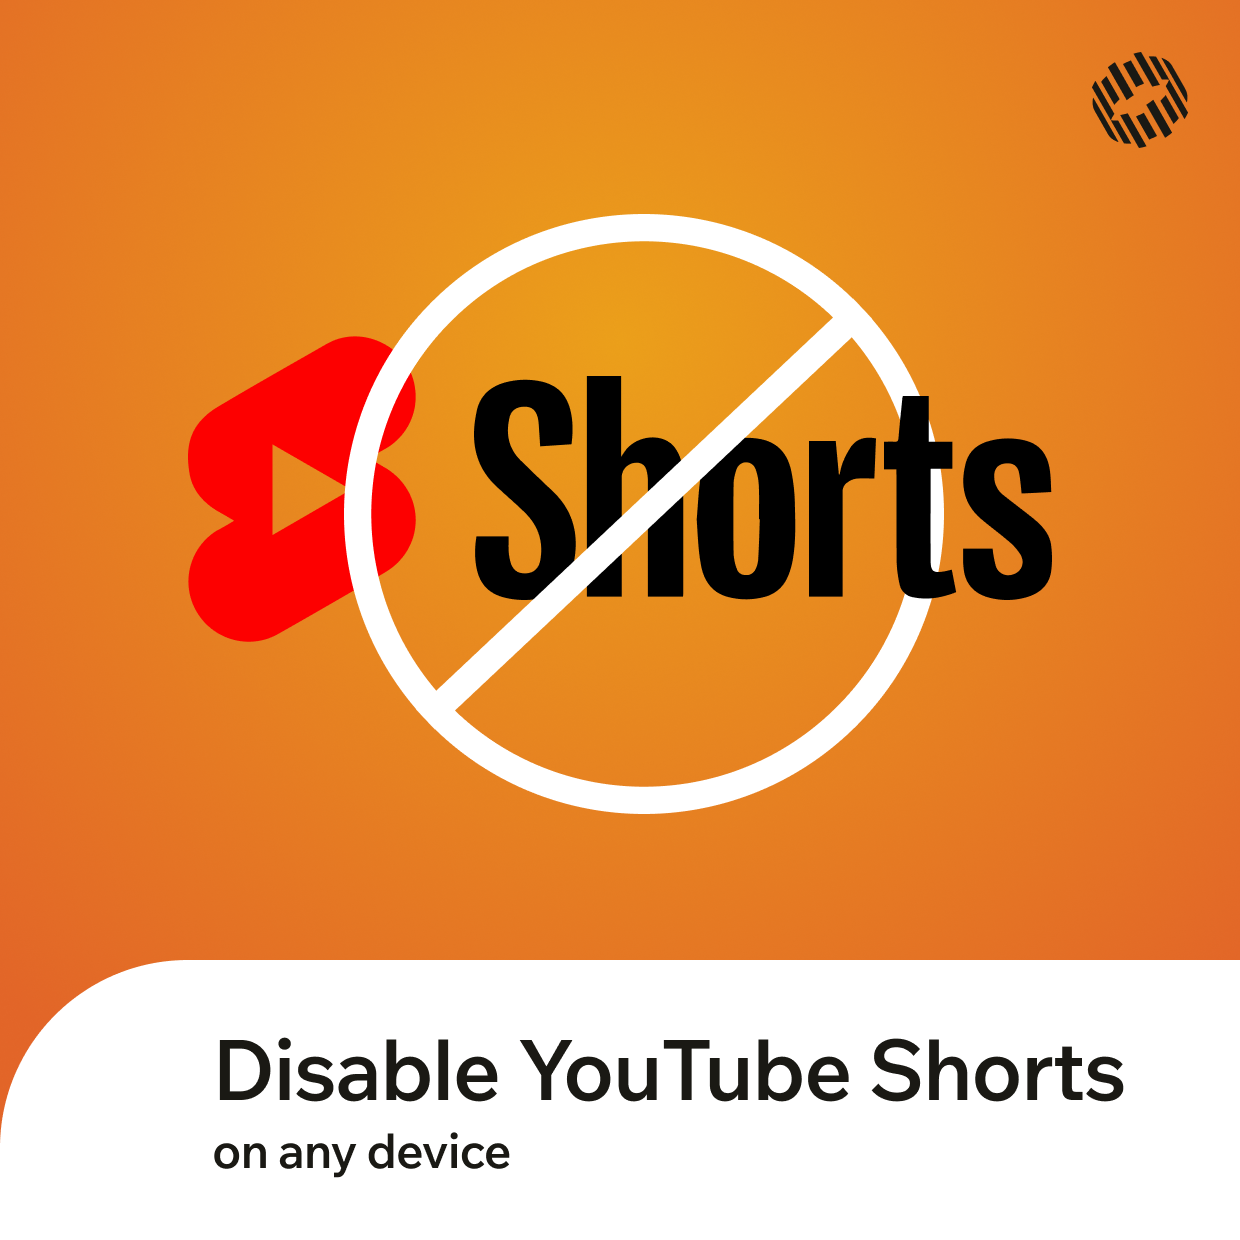 How to Disable YouTube Shorts on Any Device